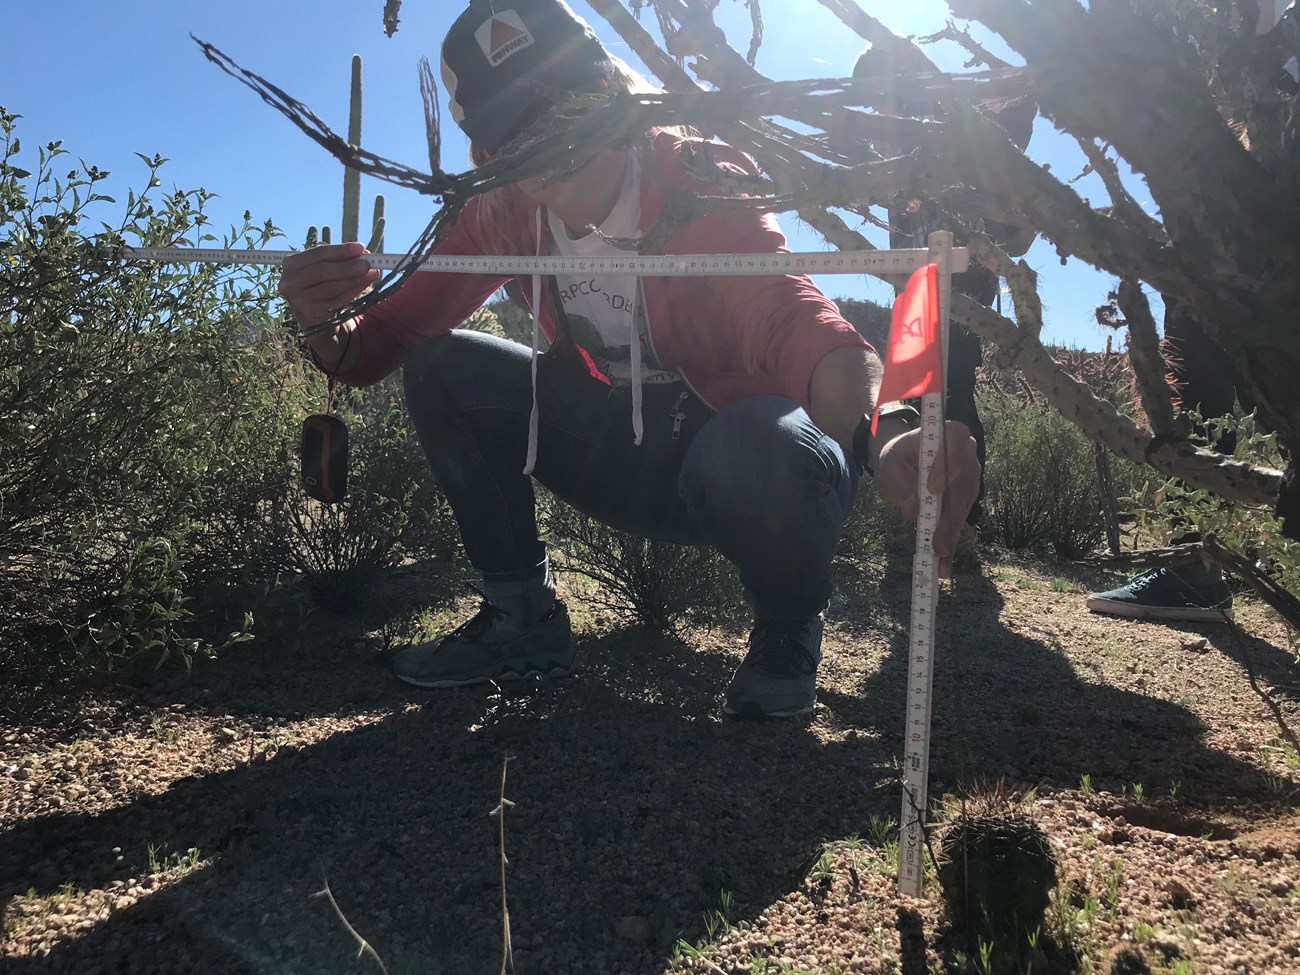 A volunteer squatting down to measure the height of a tiny saguaro under a cholla.